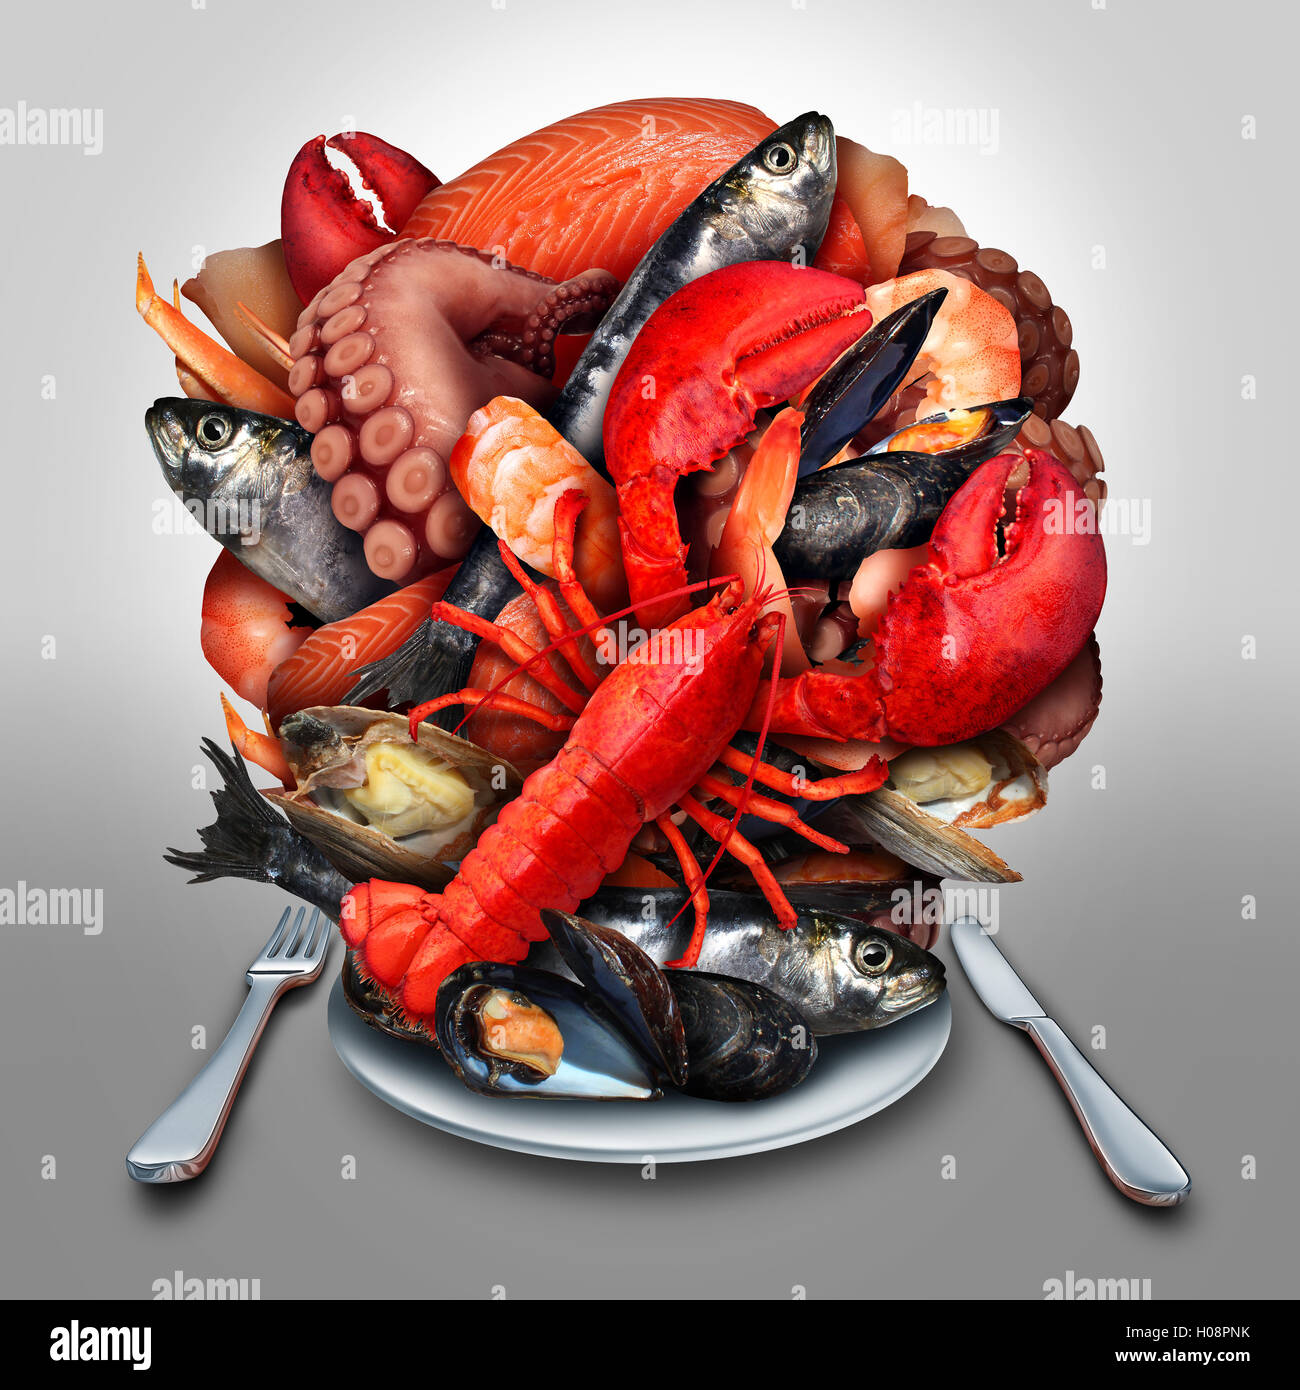 Seafood plate concept as a group of shellfish crustacean and fish grouped together on a dinner place setting as a fresh delicious meal from the ocean as lobster steamed clams mussels shrimp octopus and sardines. Stock Photo